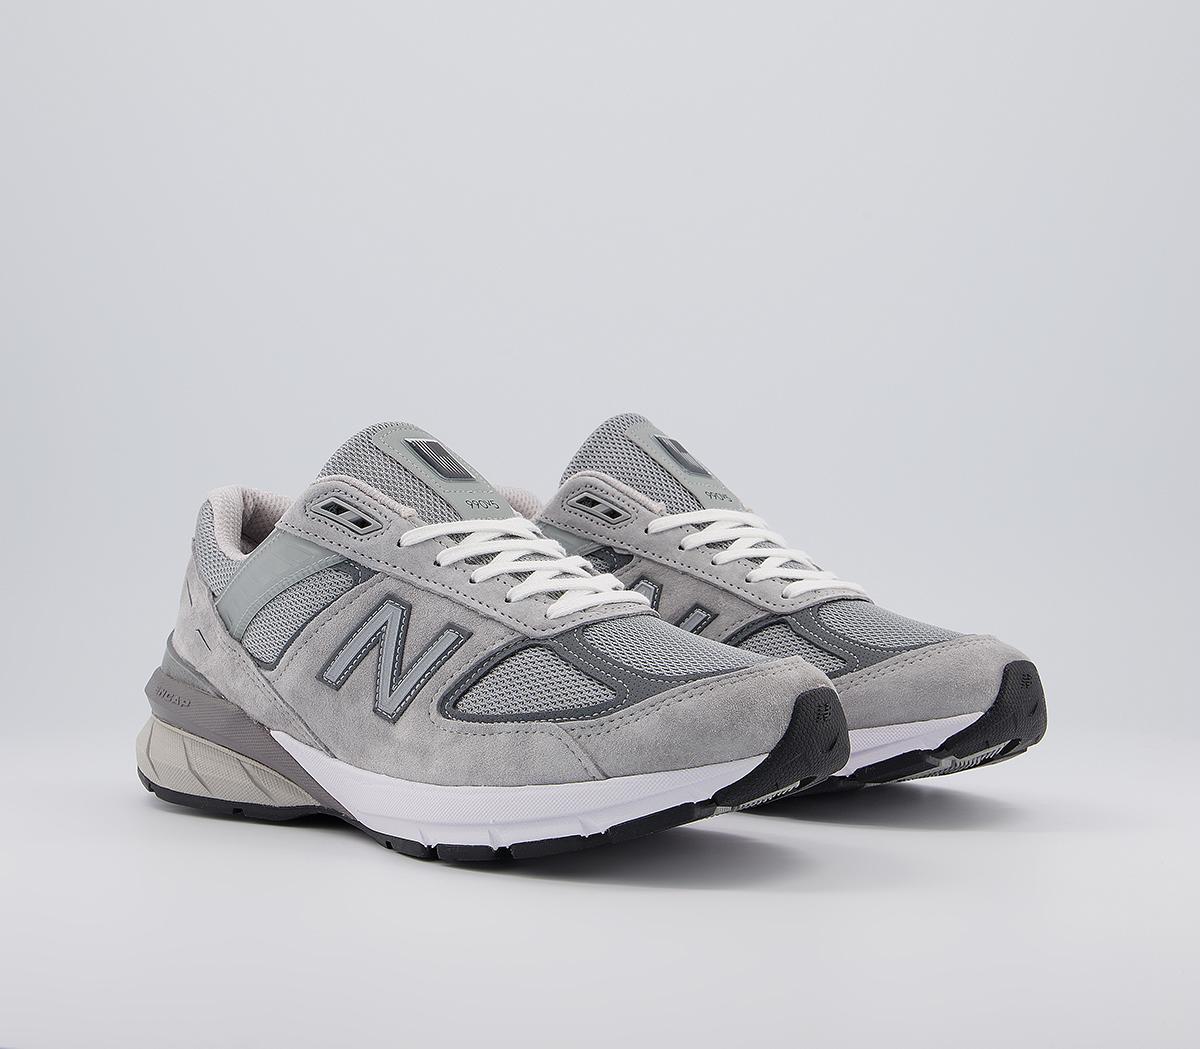 New Balance M990 Made in USA Trainers Grey Mius - Men's Shoes & Trainers